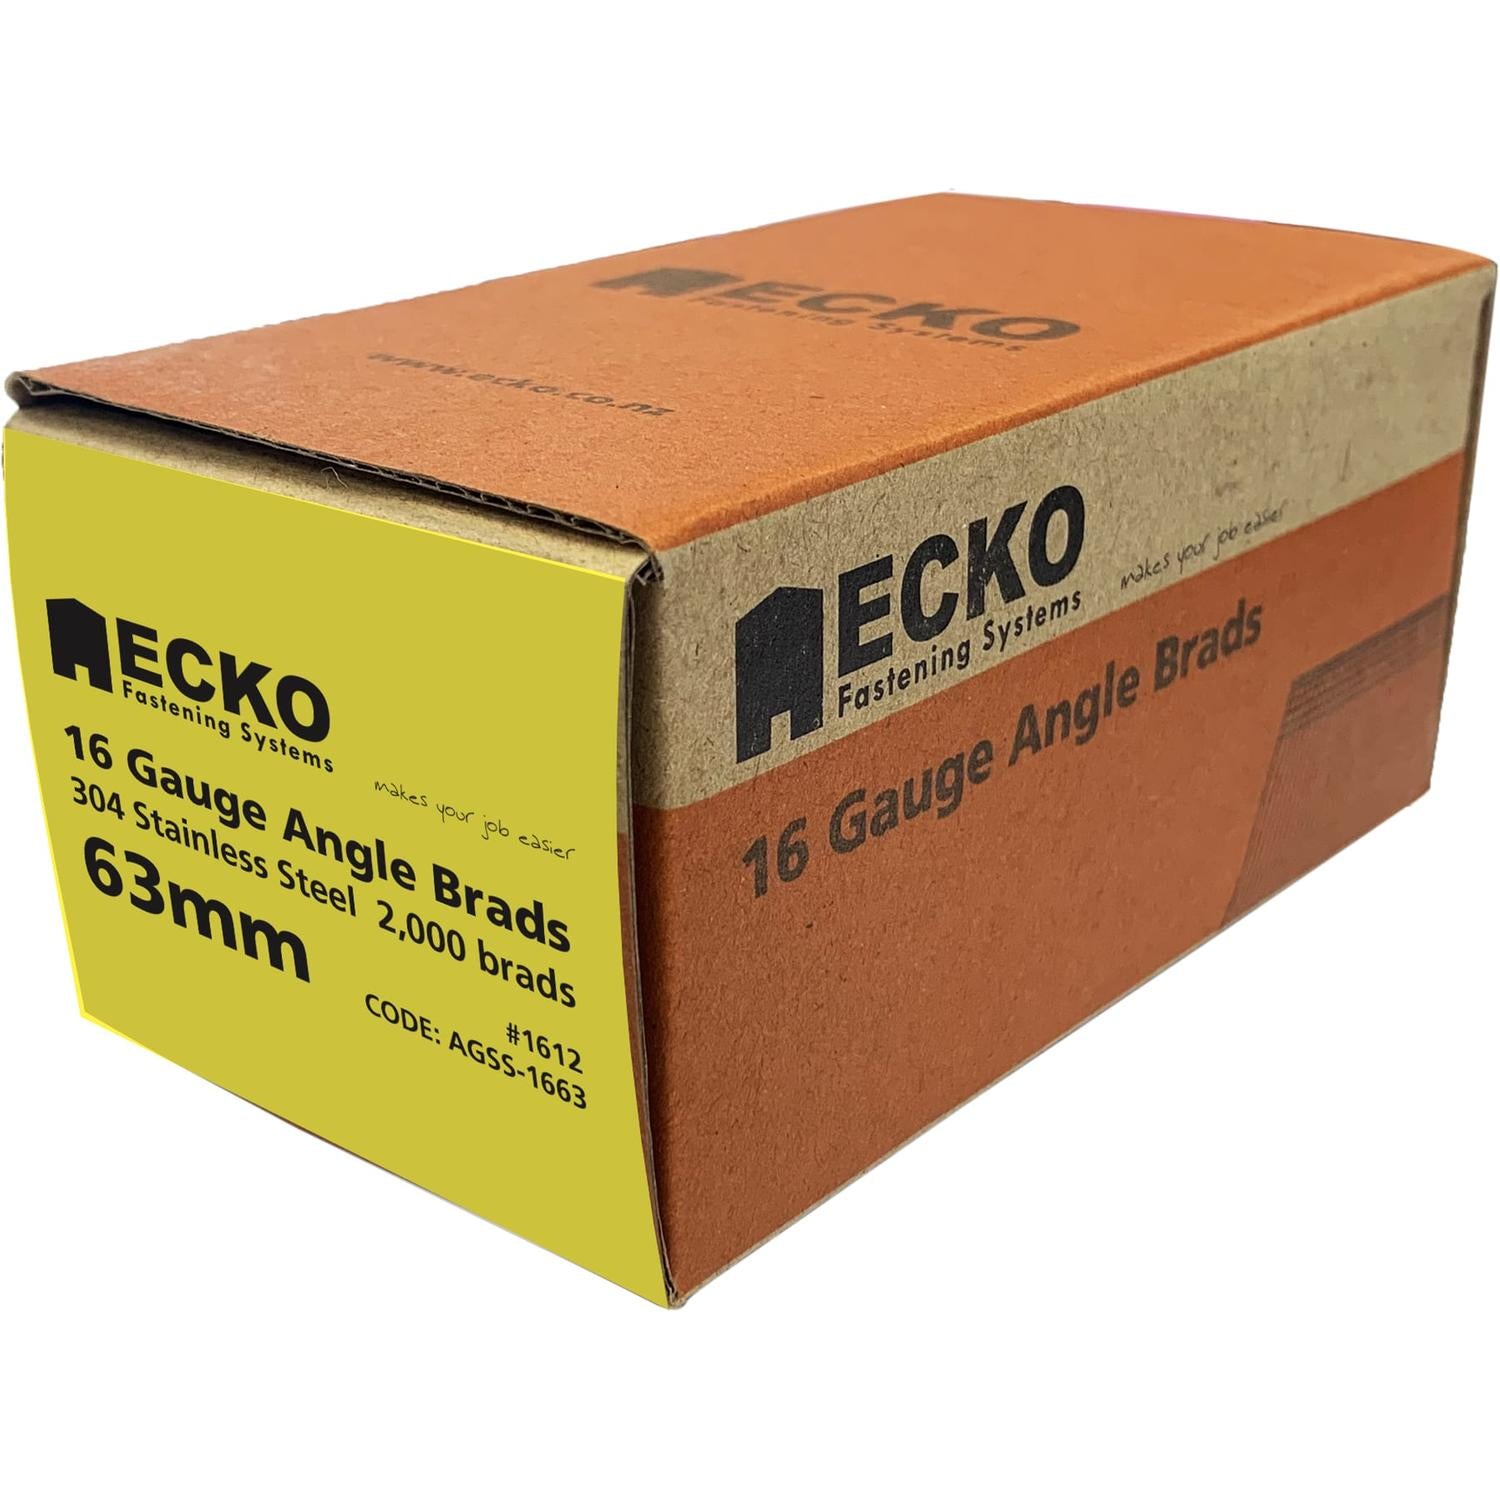 Ecko 16 Gauge Angle Brads Gasless Pack 63 X 1.6Mm 304 Stainless Steel (2000)